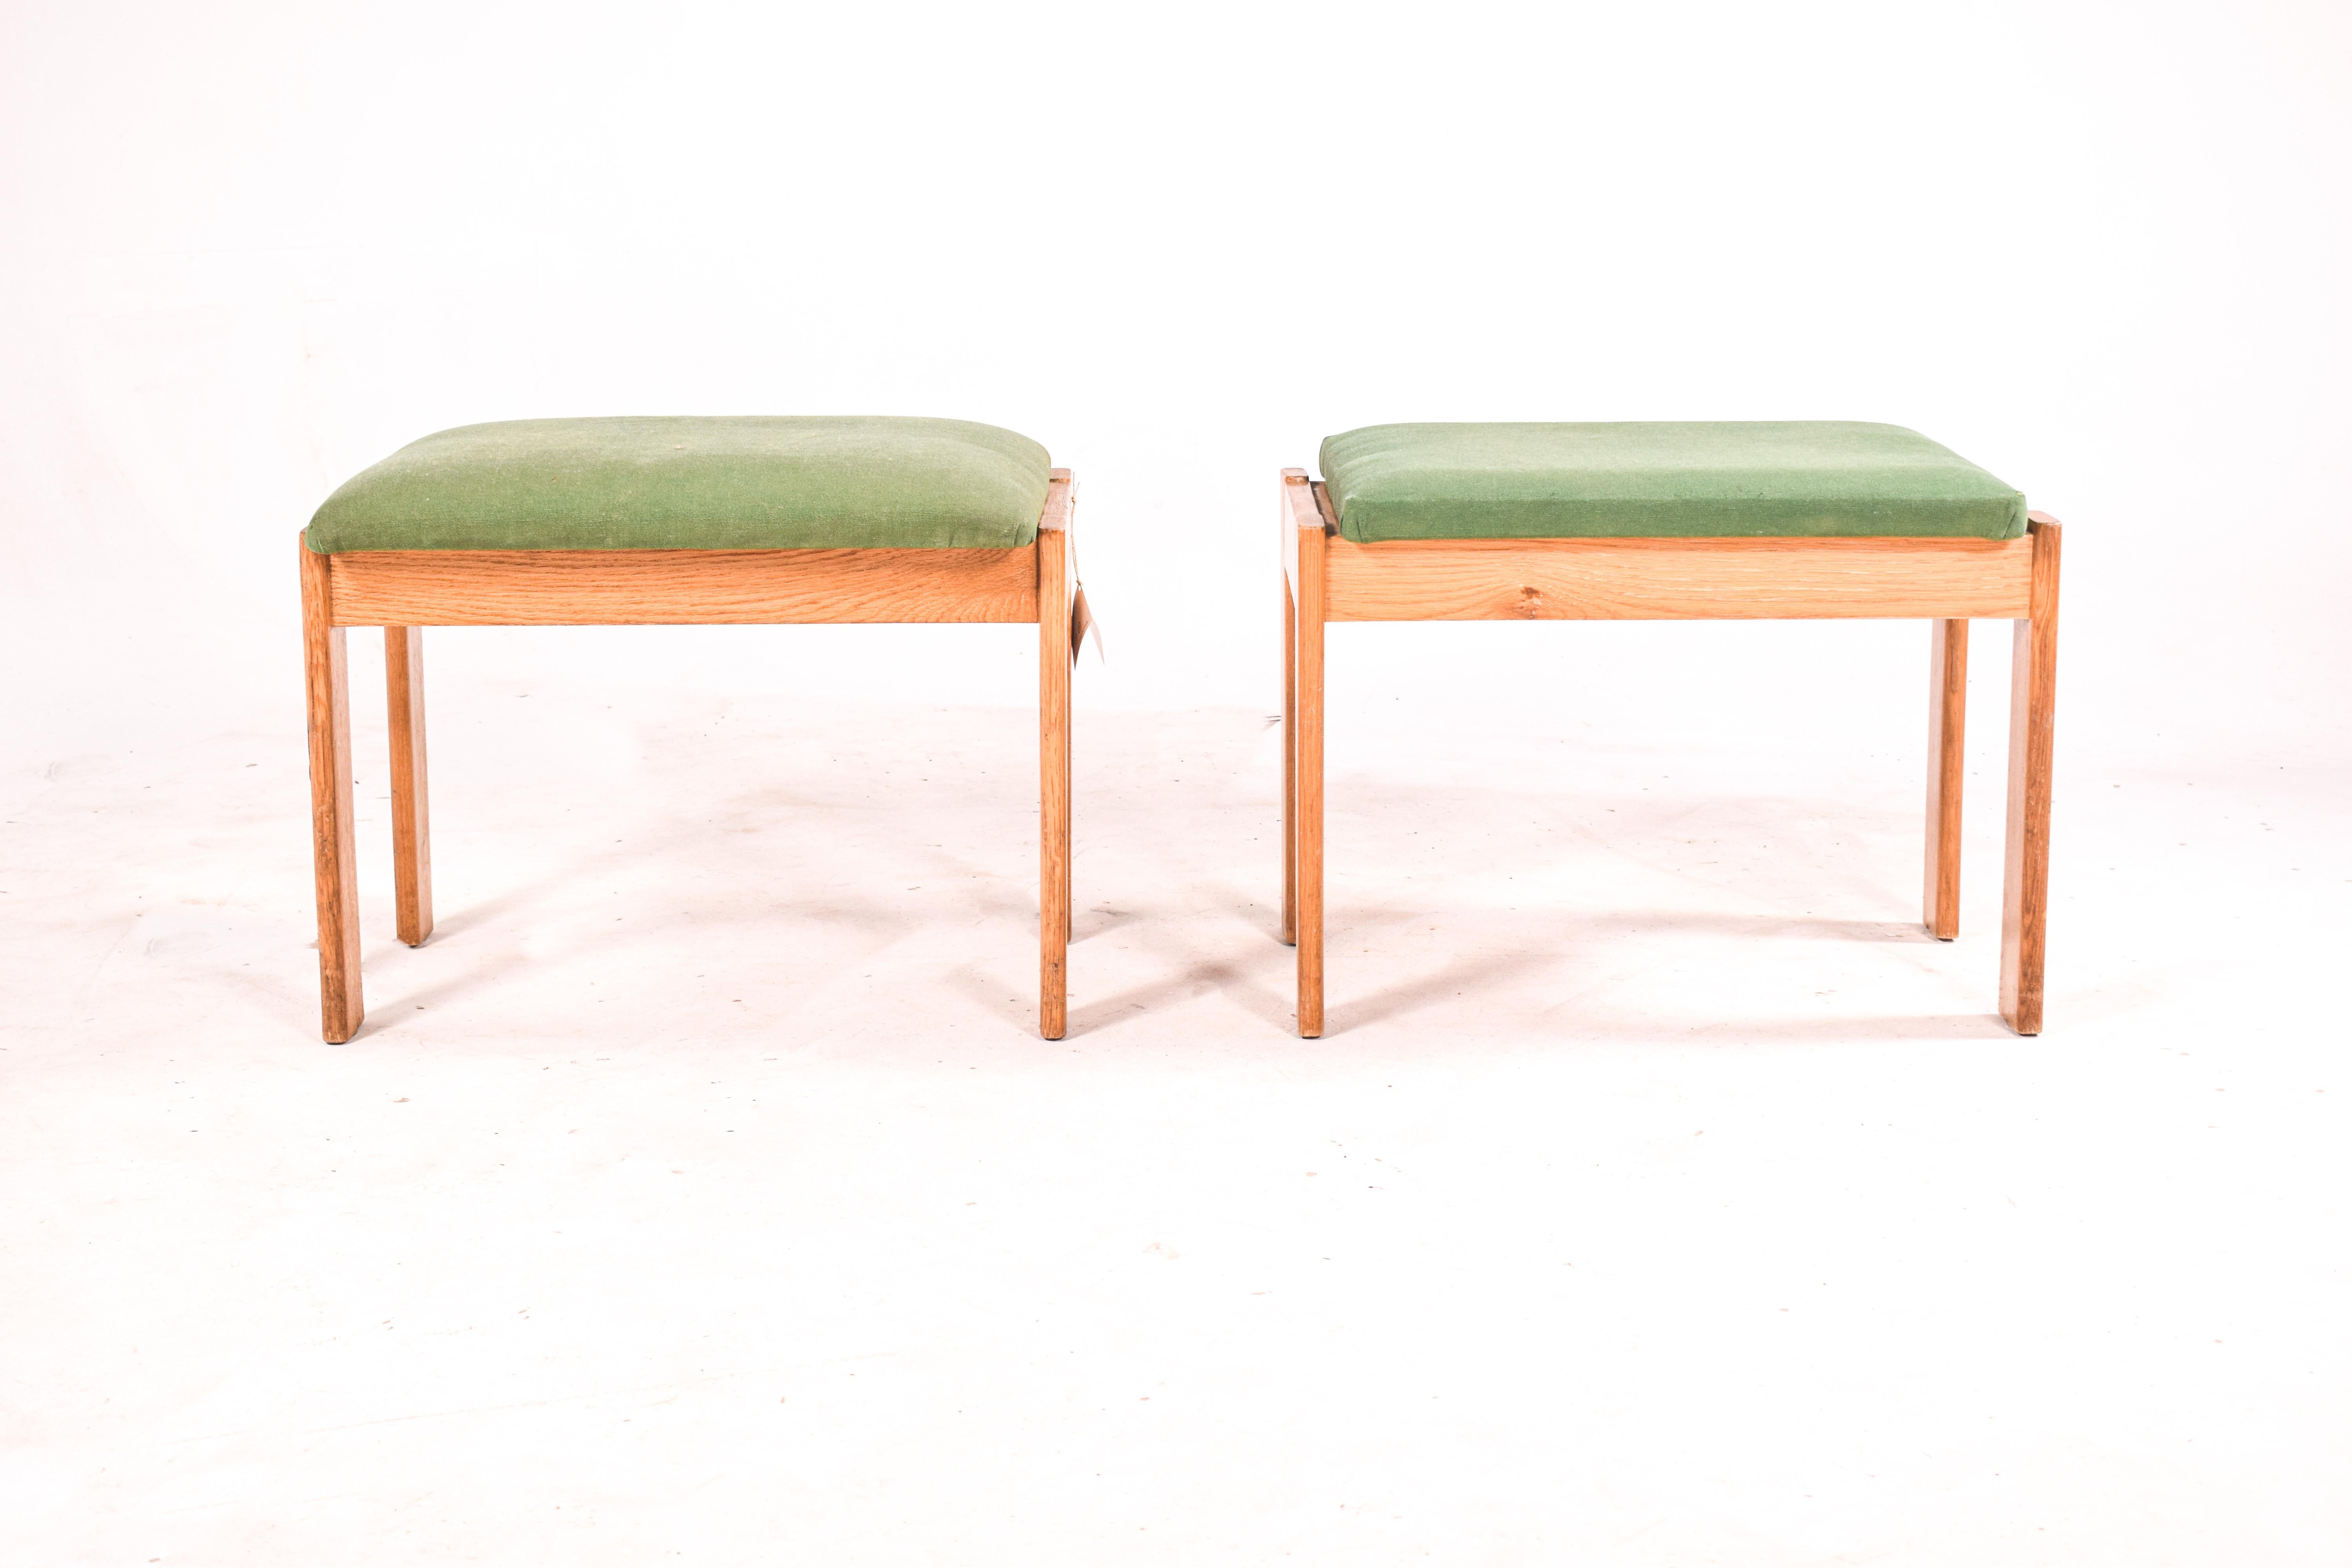 Pair of oak benches/side tables upholstered in green fabric. This pair of benches is a Portuguese design from the 80's. The inner part of the bench that acts as a support table when raised is in white Formica. Perfect table for decoration at home,